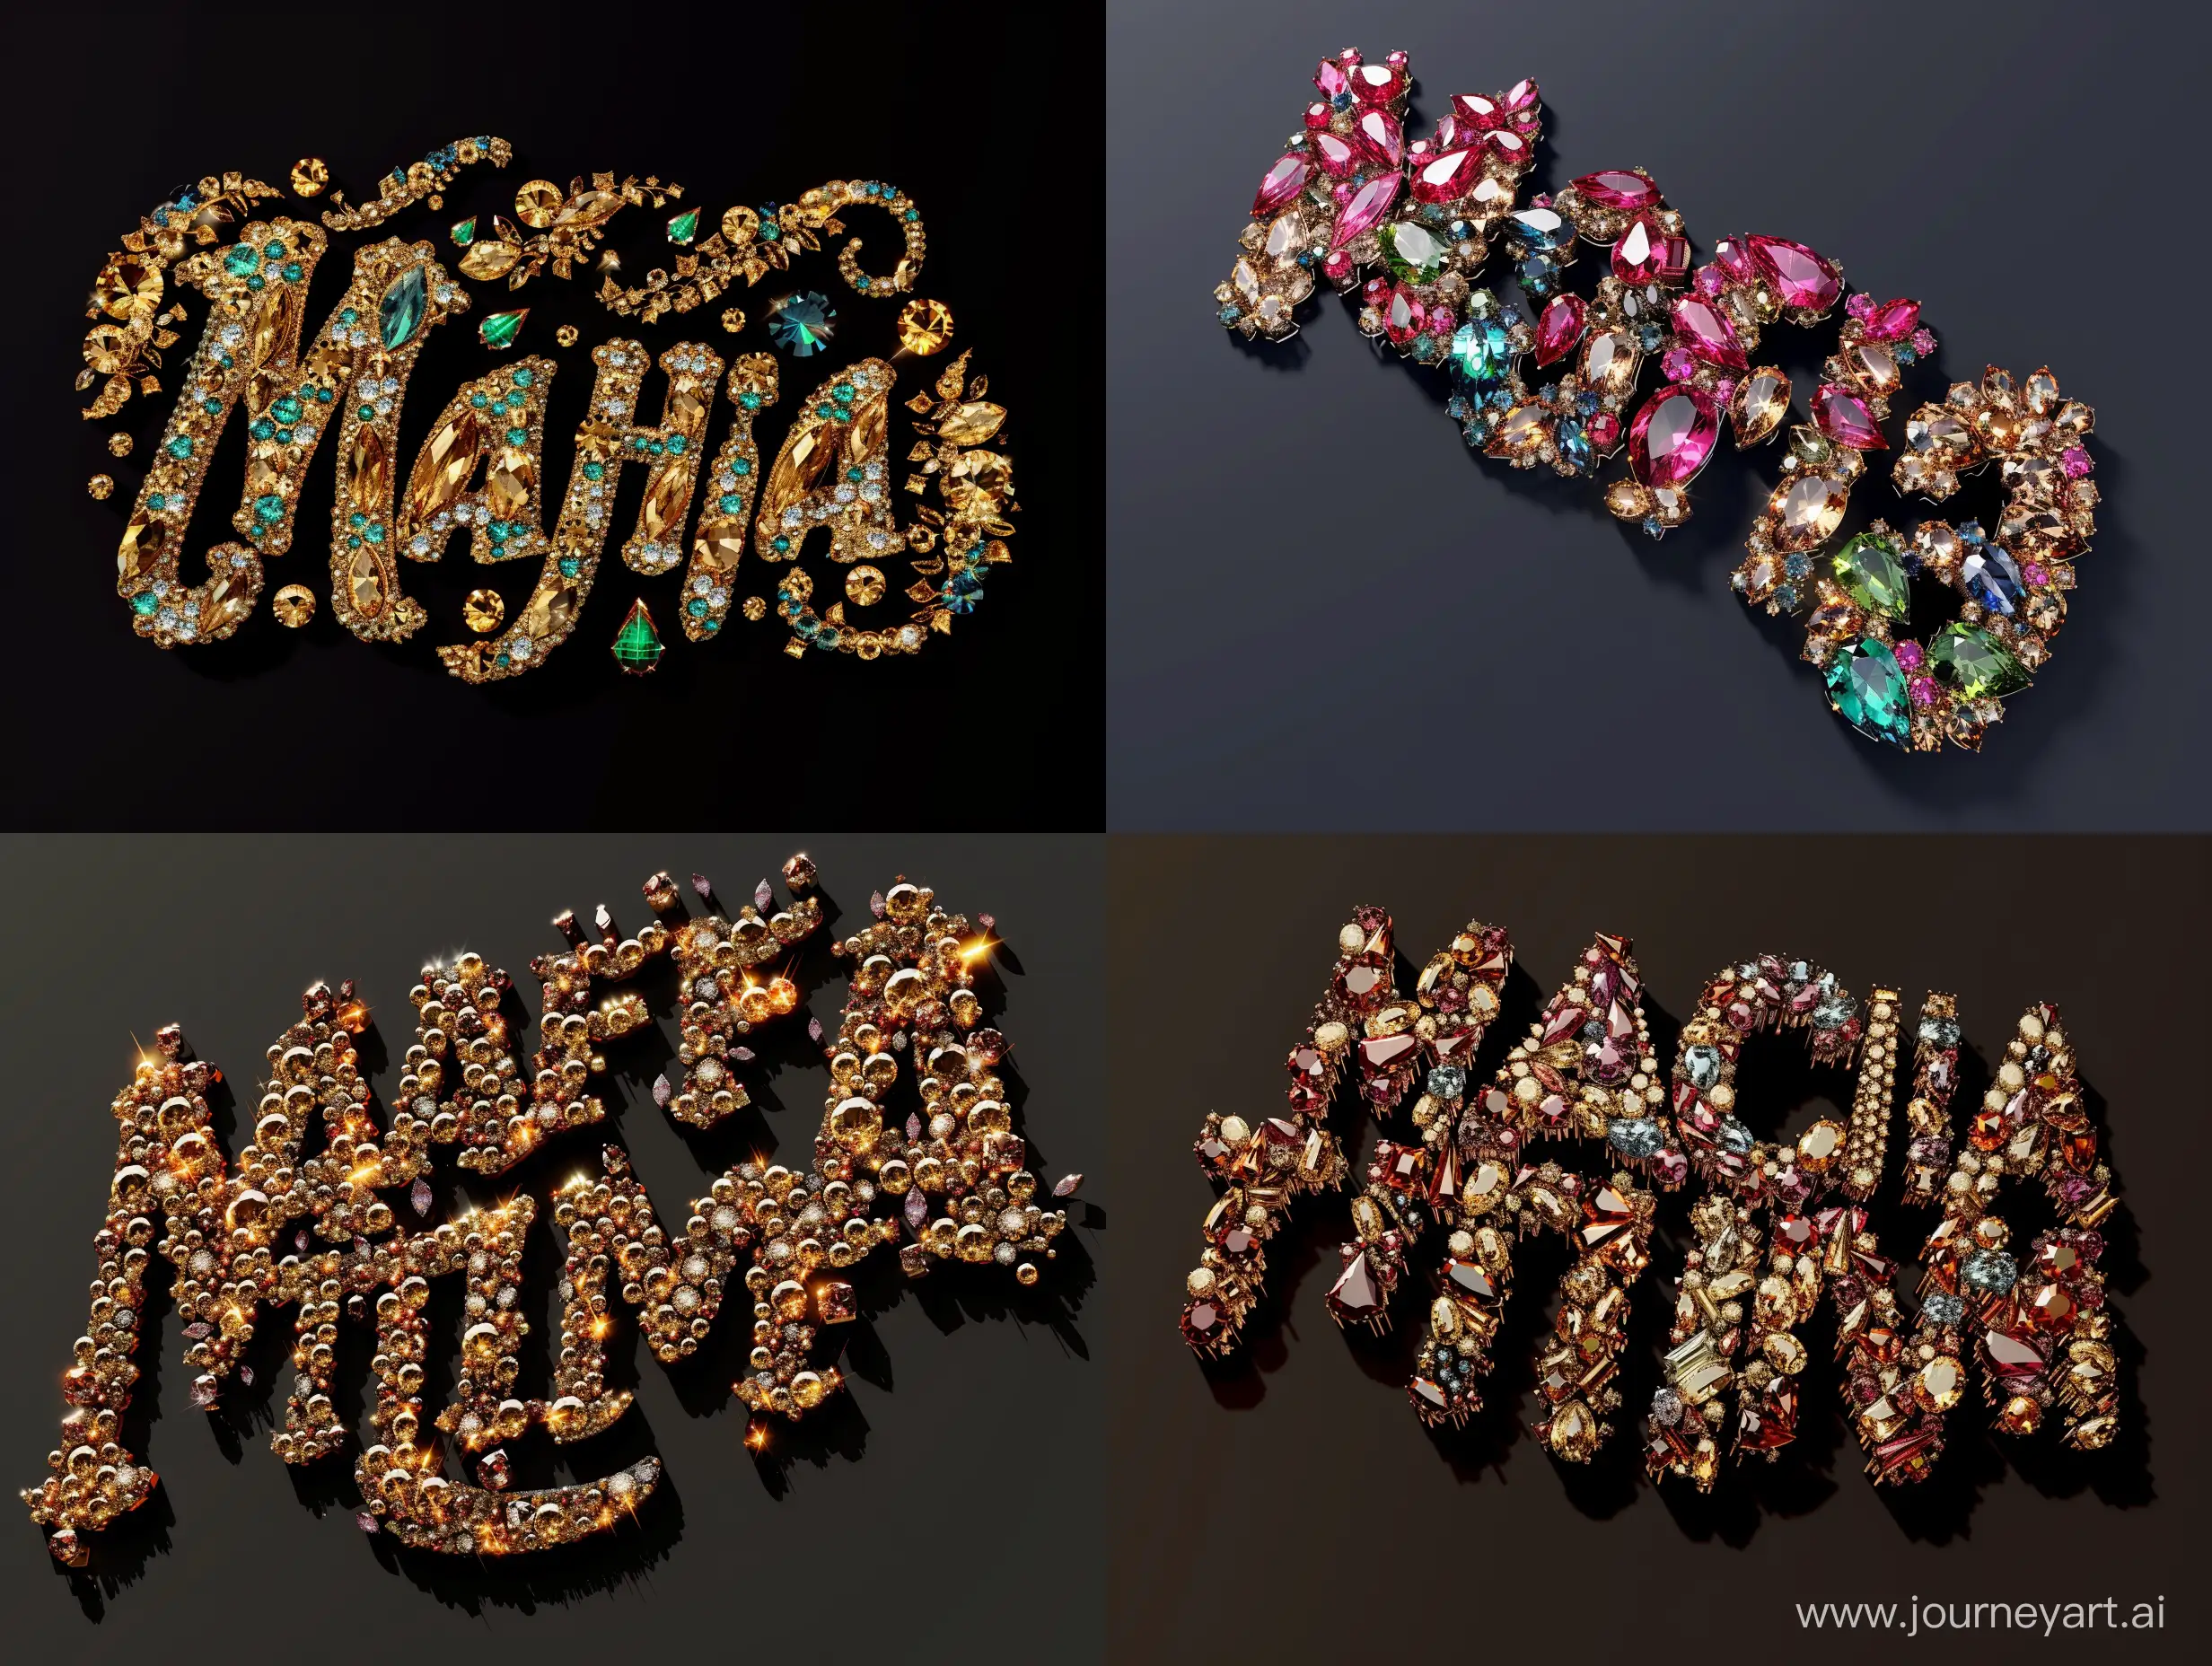 Lettermark logo with a dynamic arrangement of "Mafia" and "Time" made with precious stones